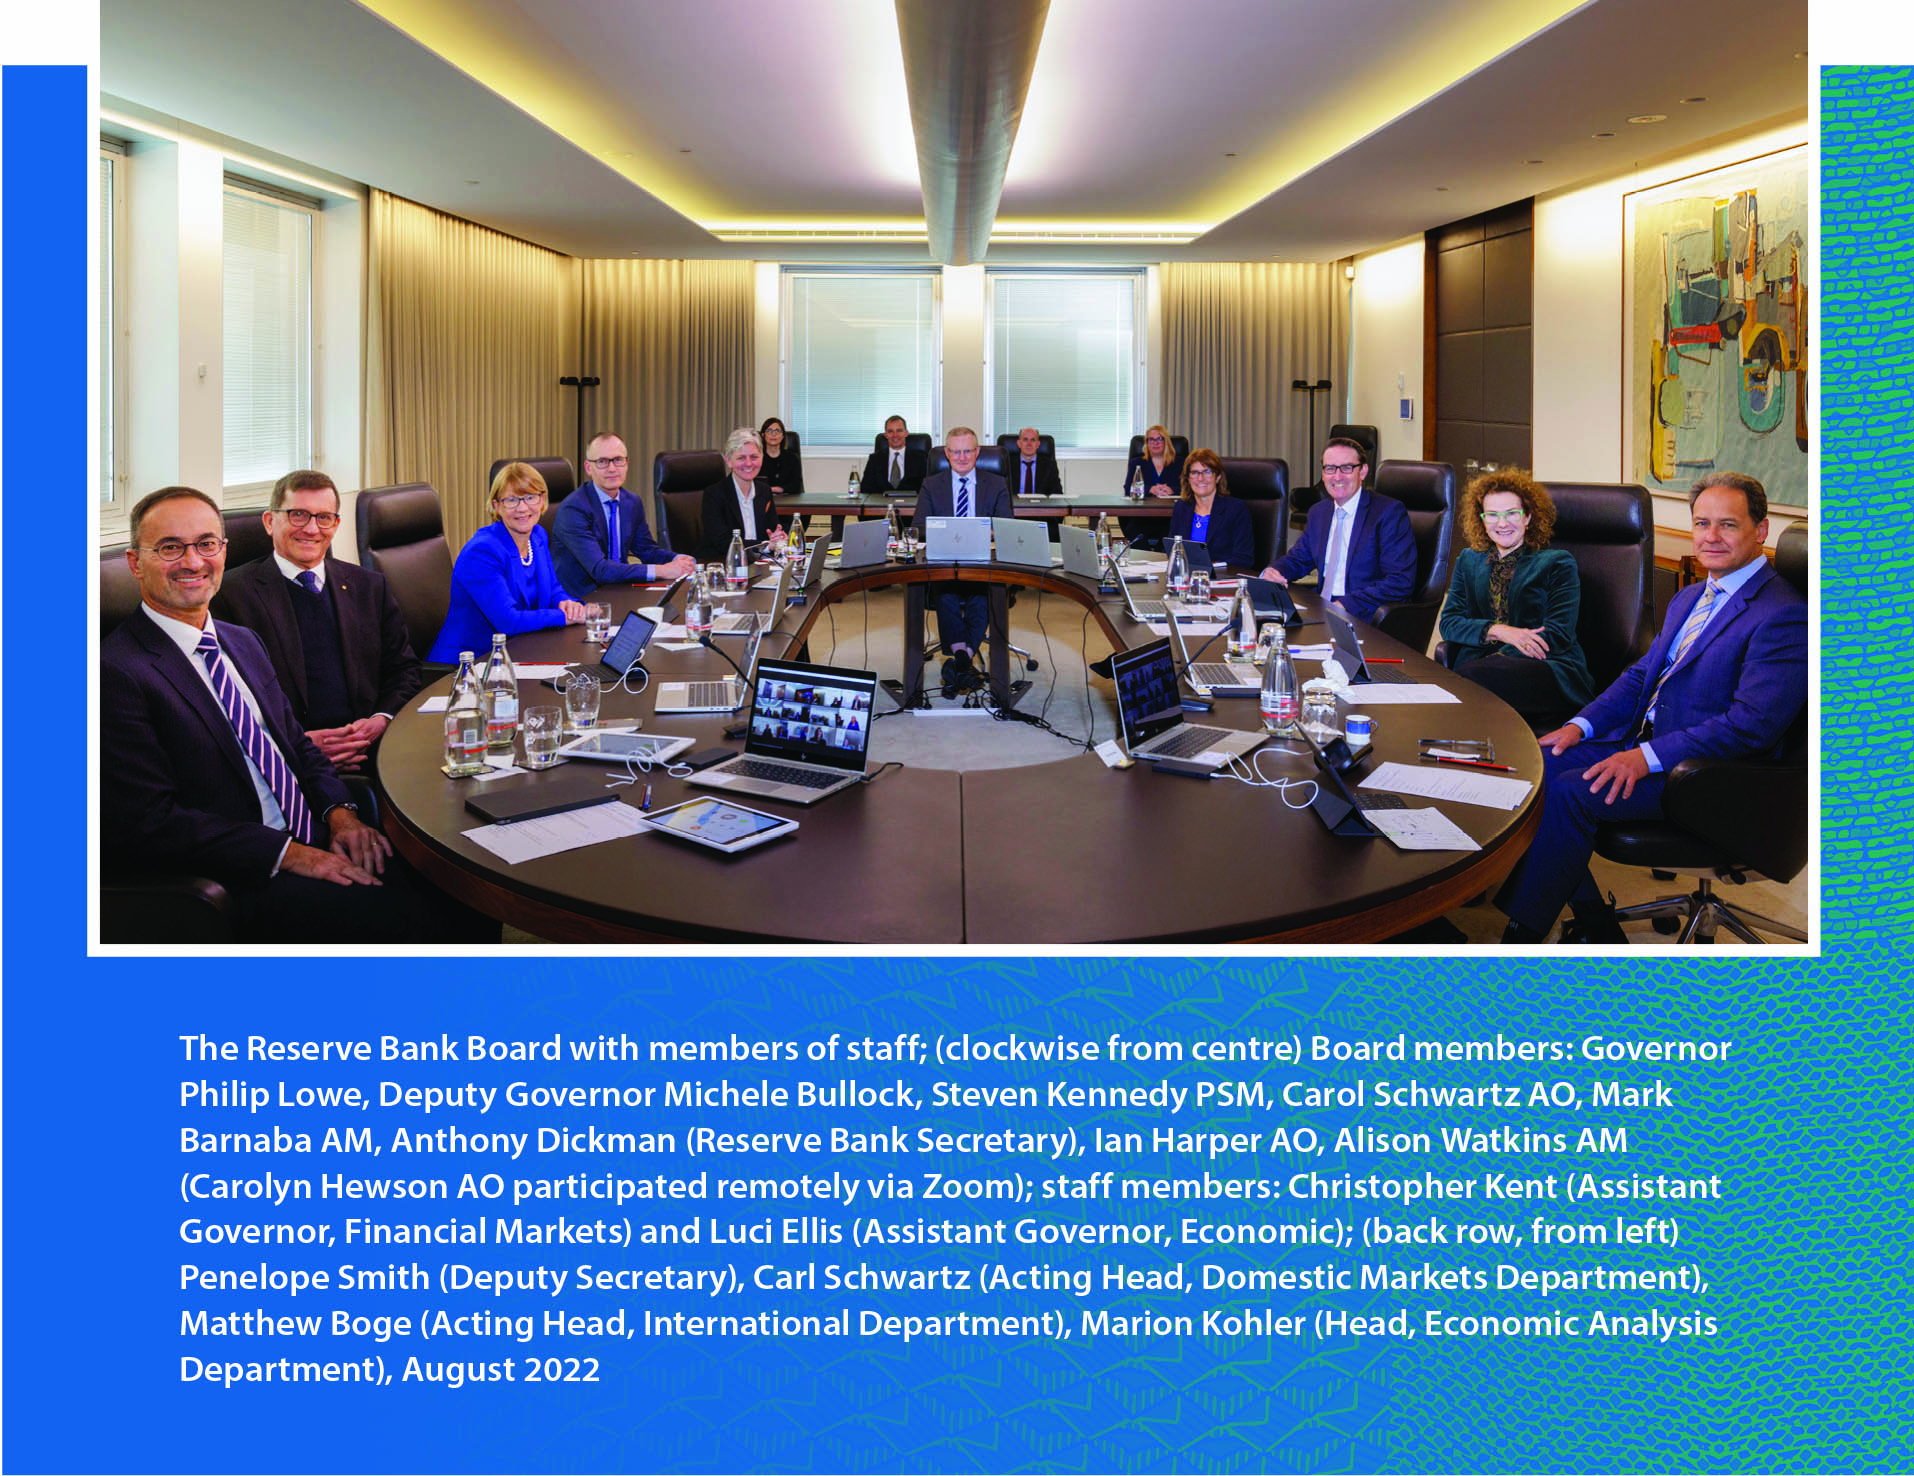 The Reserve Bank Board with members of staff